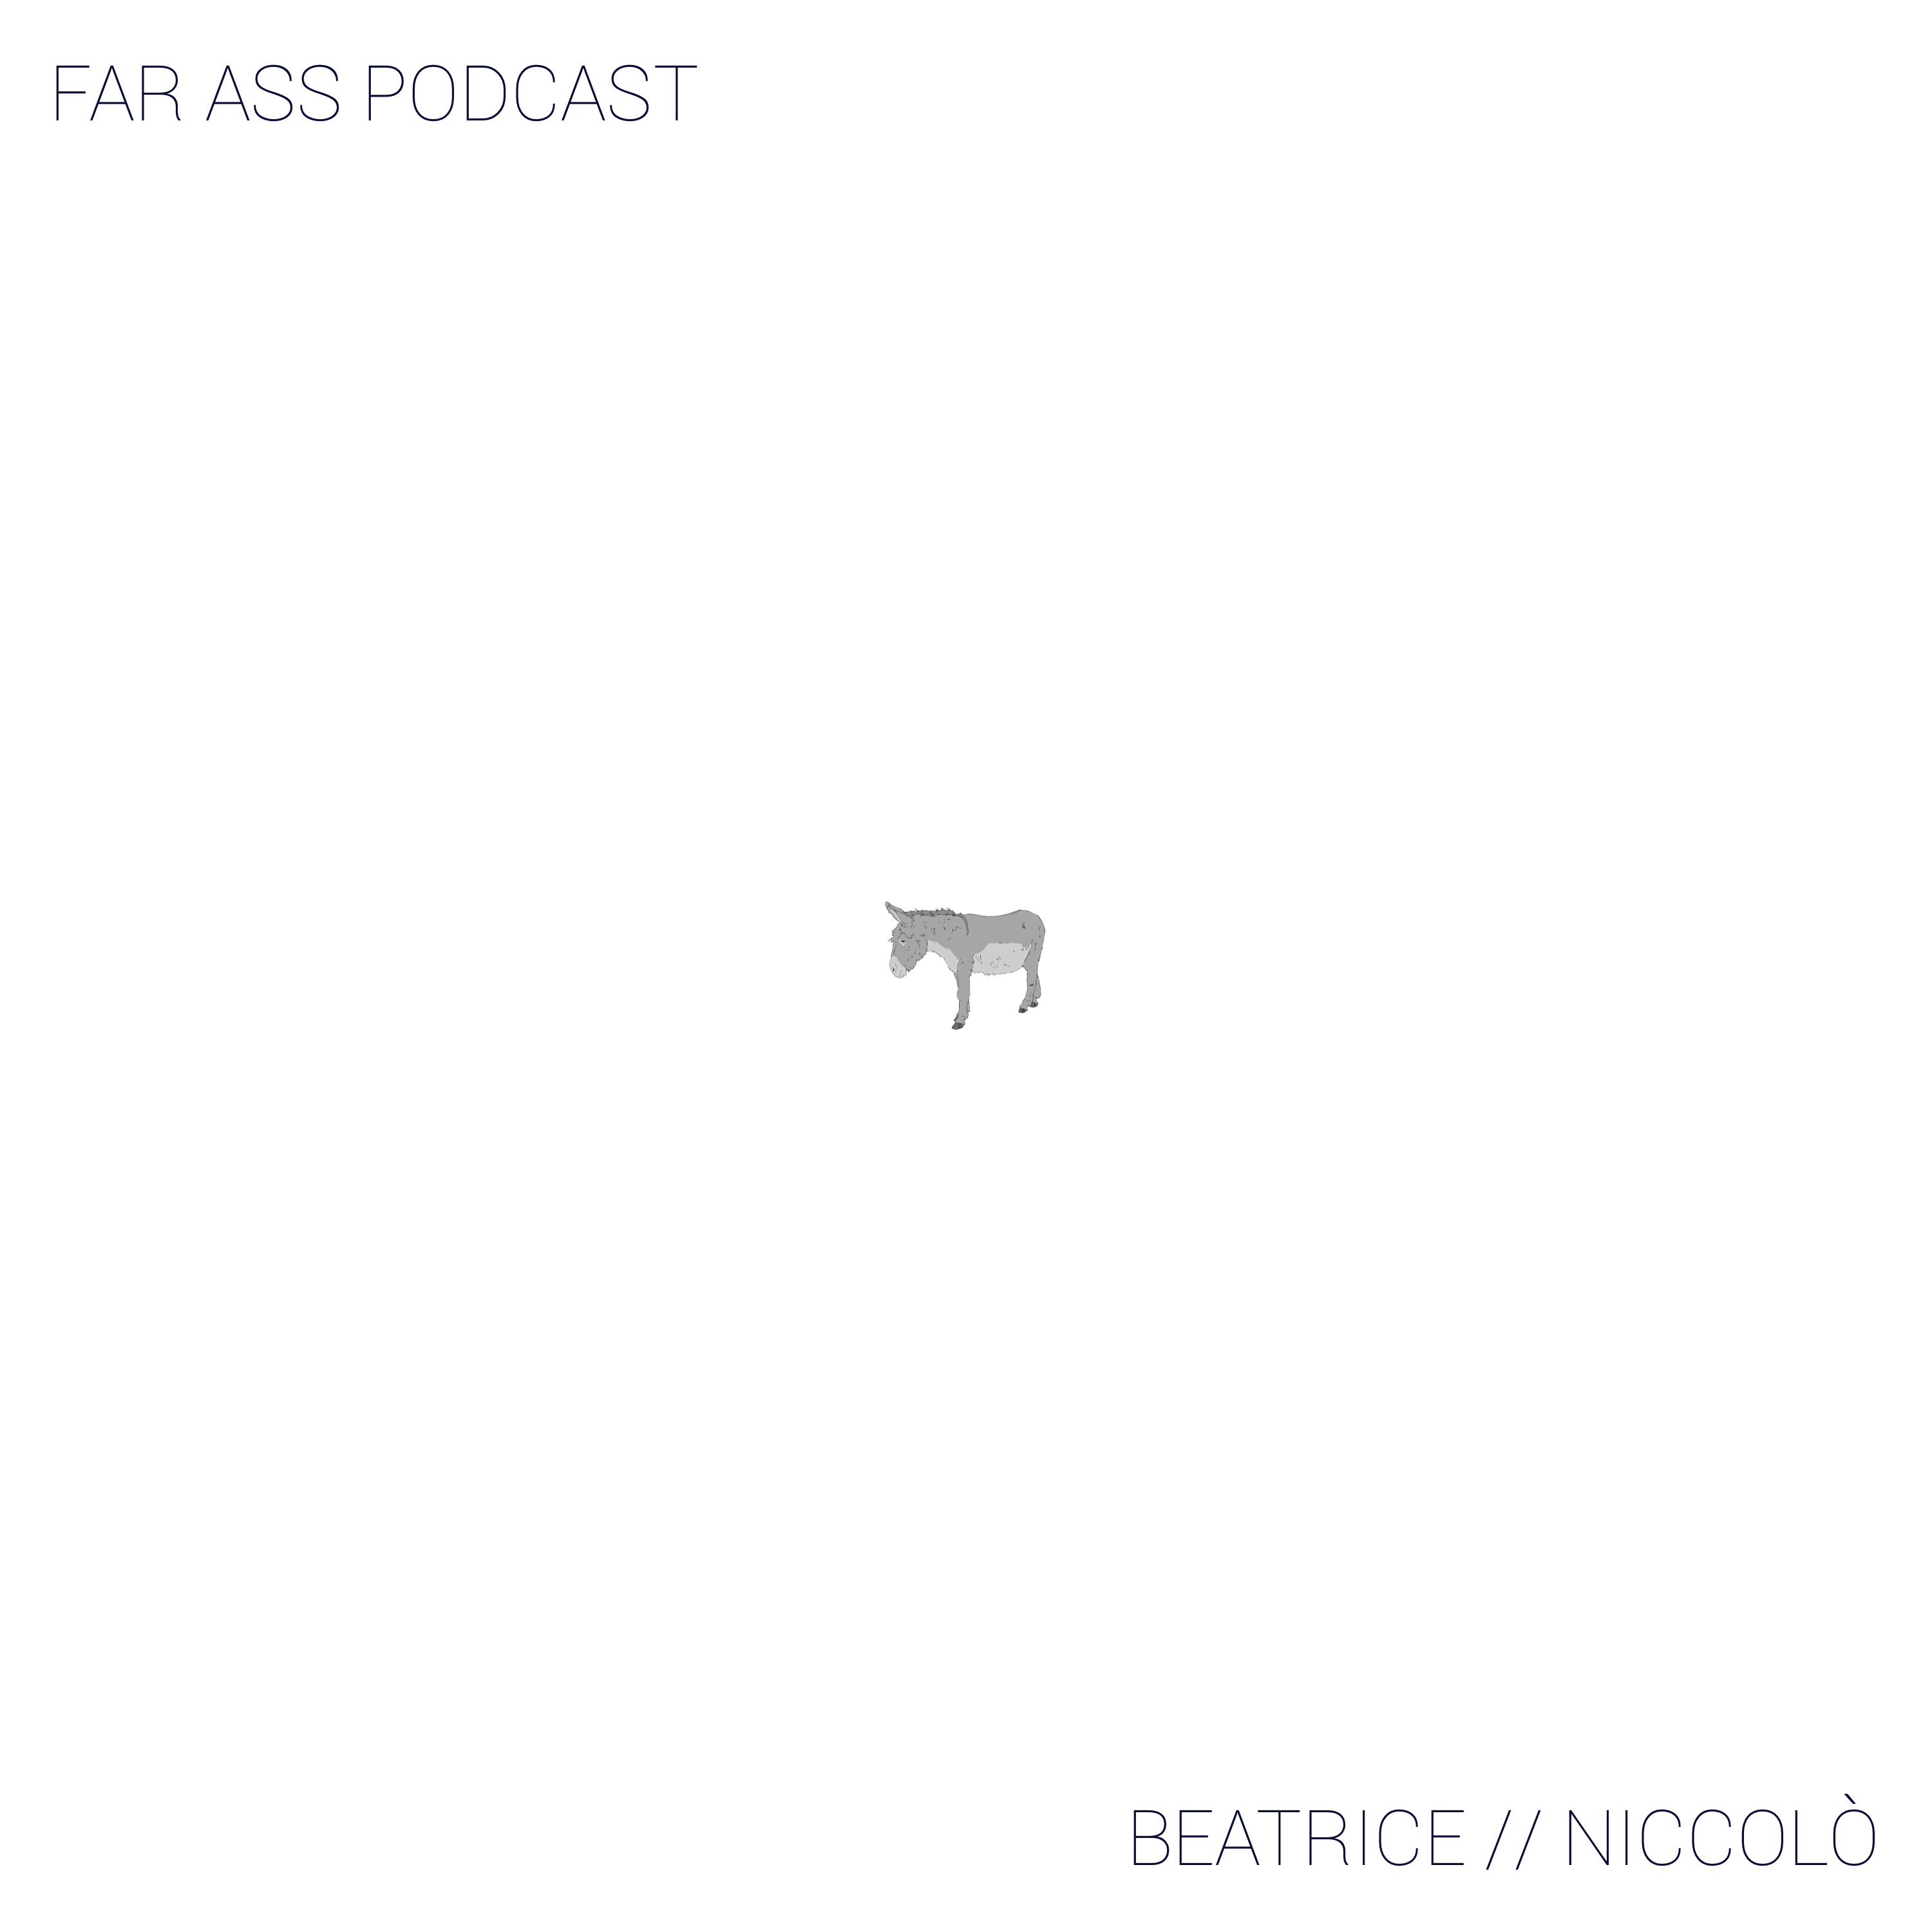 Far Ass Podcast project image preview.